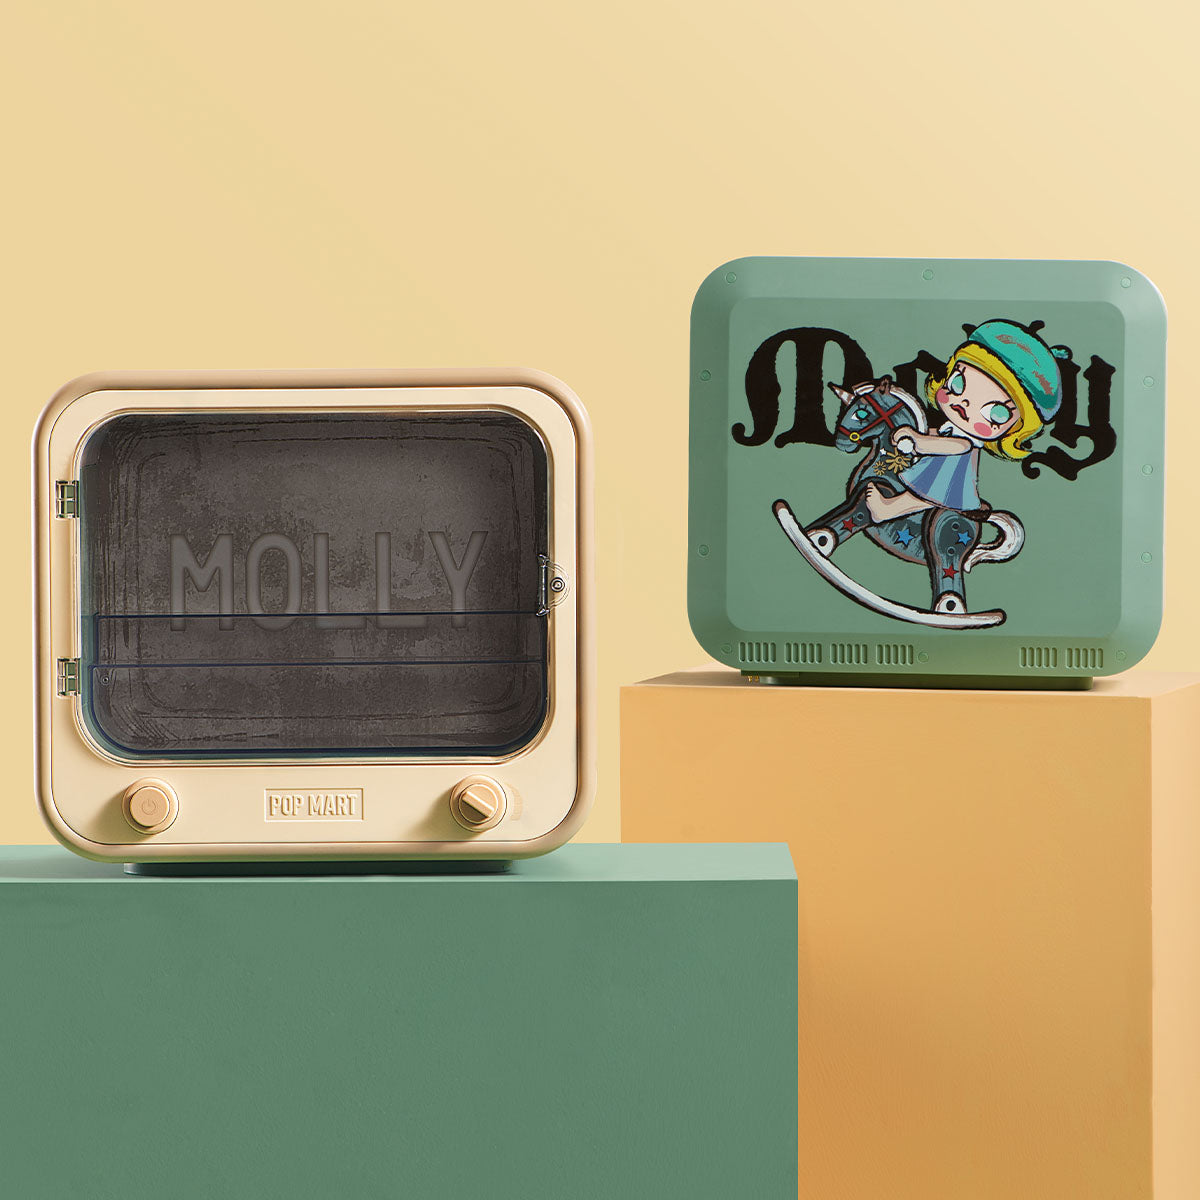 【Limited】MOLLY Anniversary Statues Classical Retro Series-TV Set Luminous Display Container